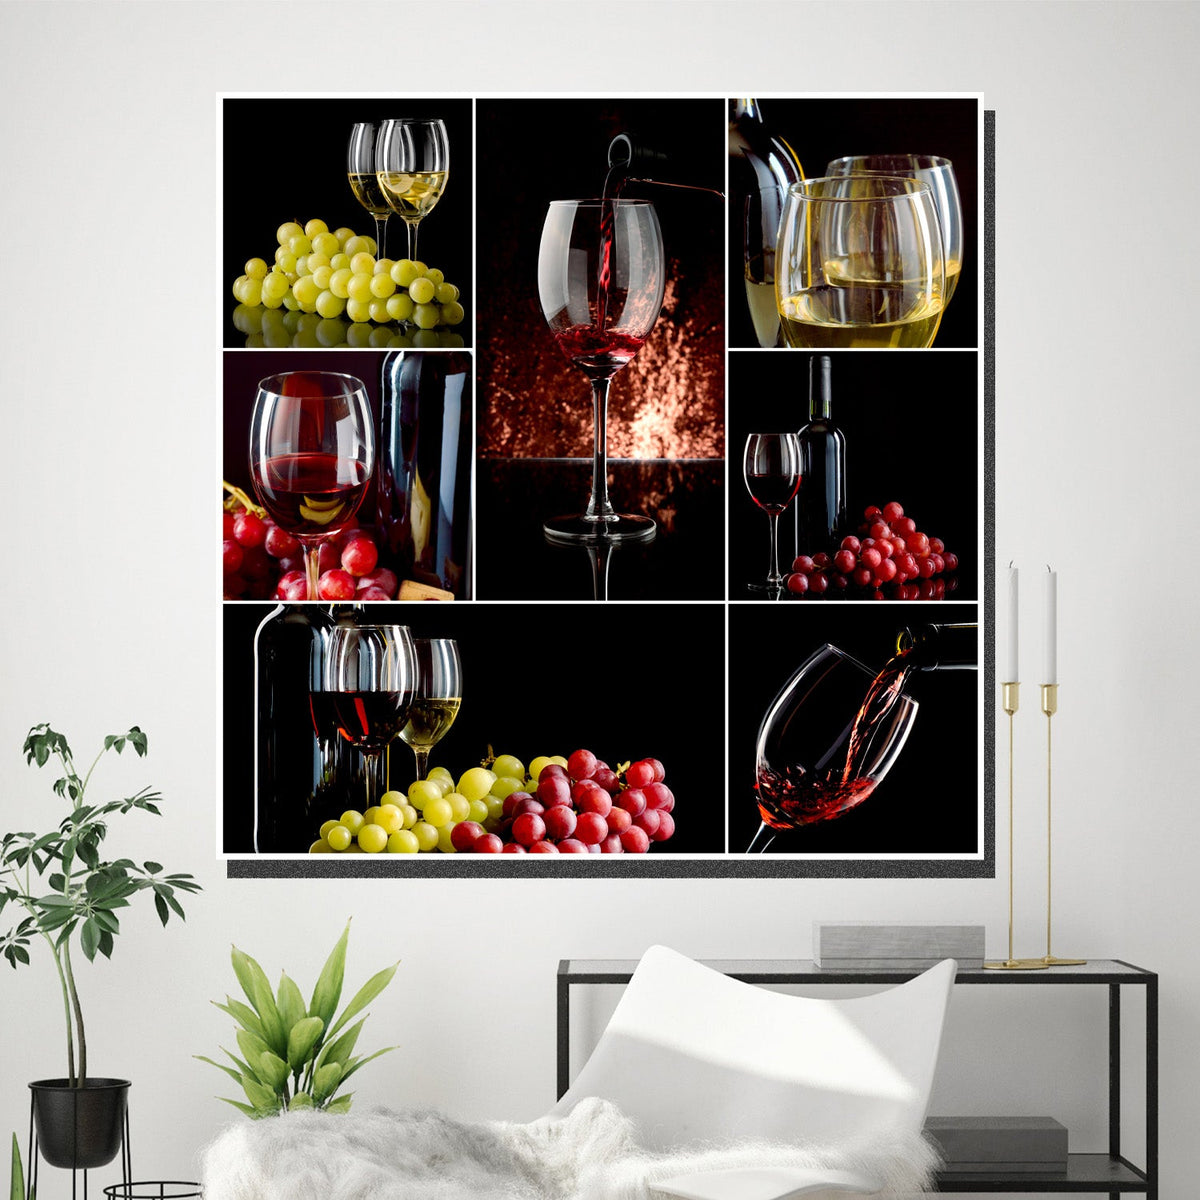 https://cdn.shopify.com/s/files/1/0387/9986/8044/products/WineandGrapesCollageCanvasArtprintStretched-1.jpg